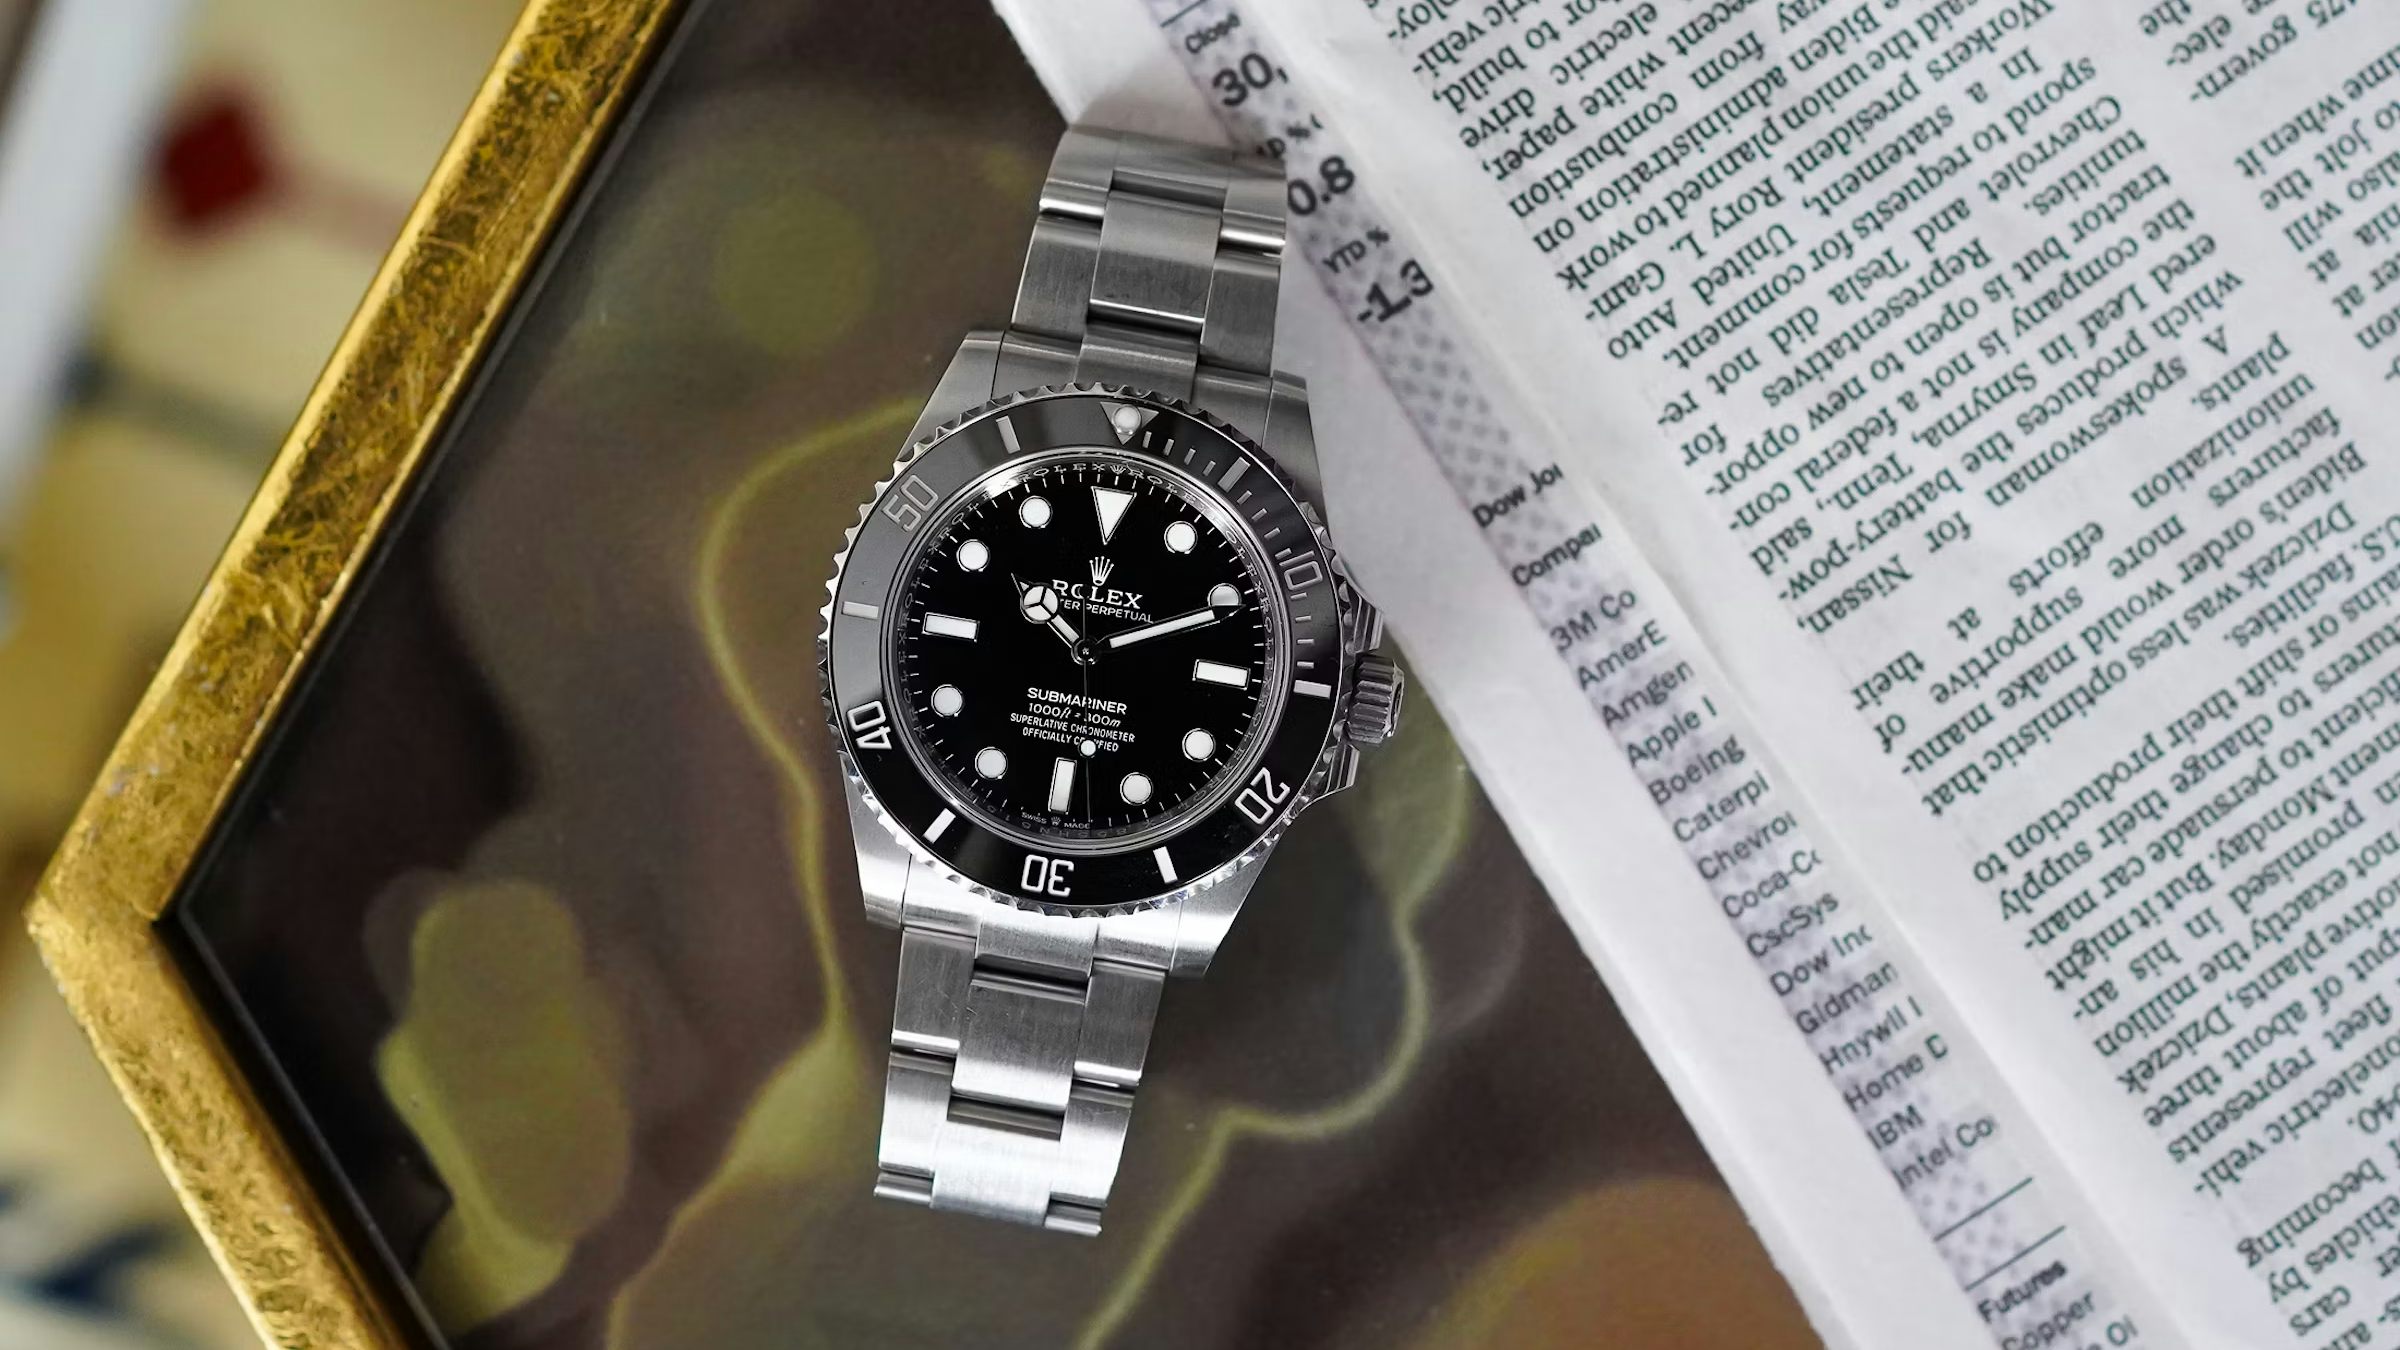 The Rolex Submariner Guide